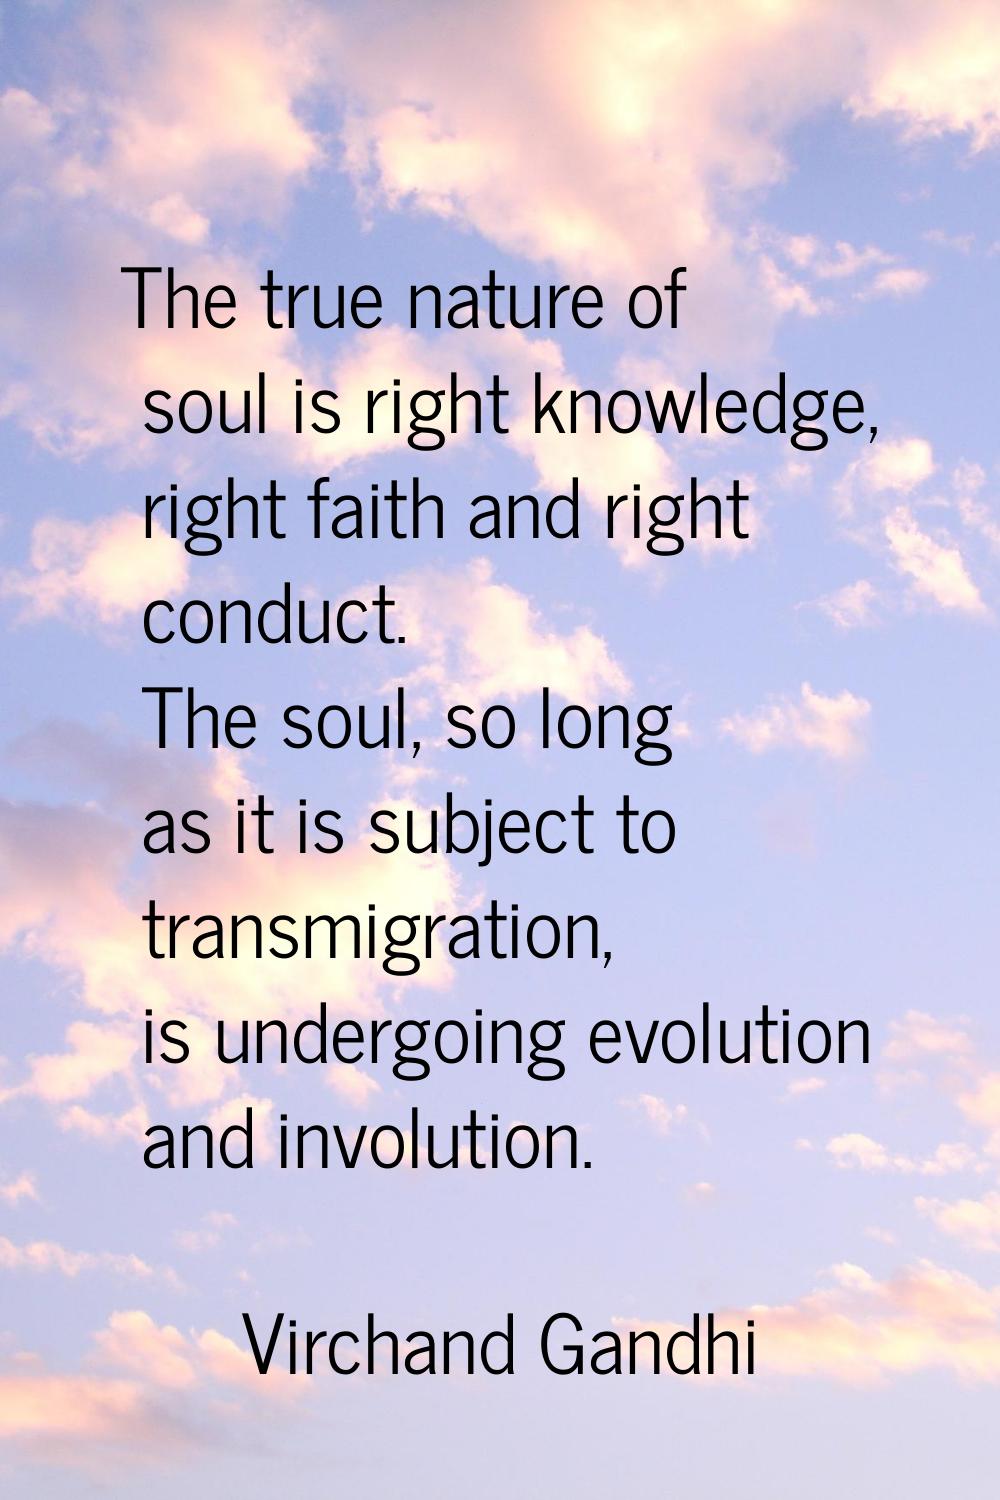 The true nature of soul is right knowledge, right faith and right conduct. The soul, so long as it 